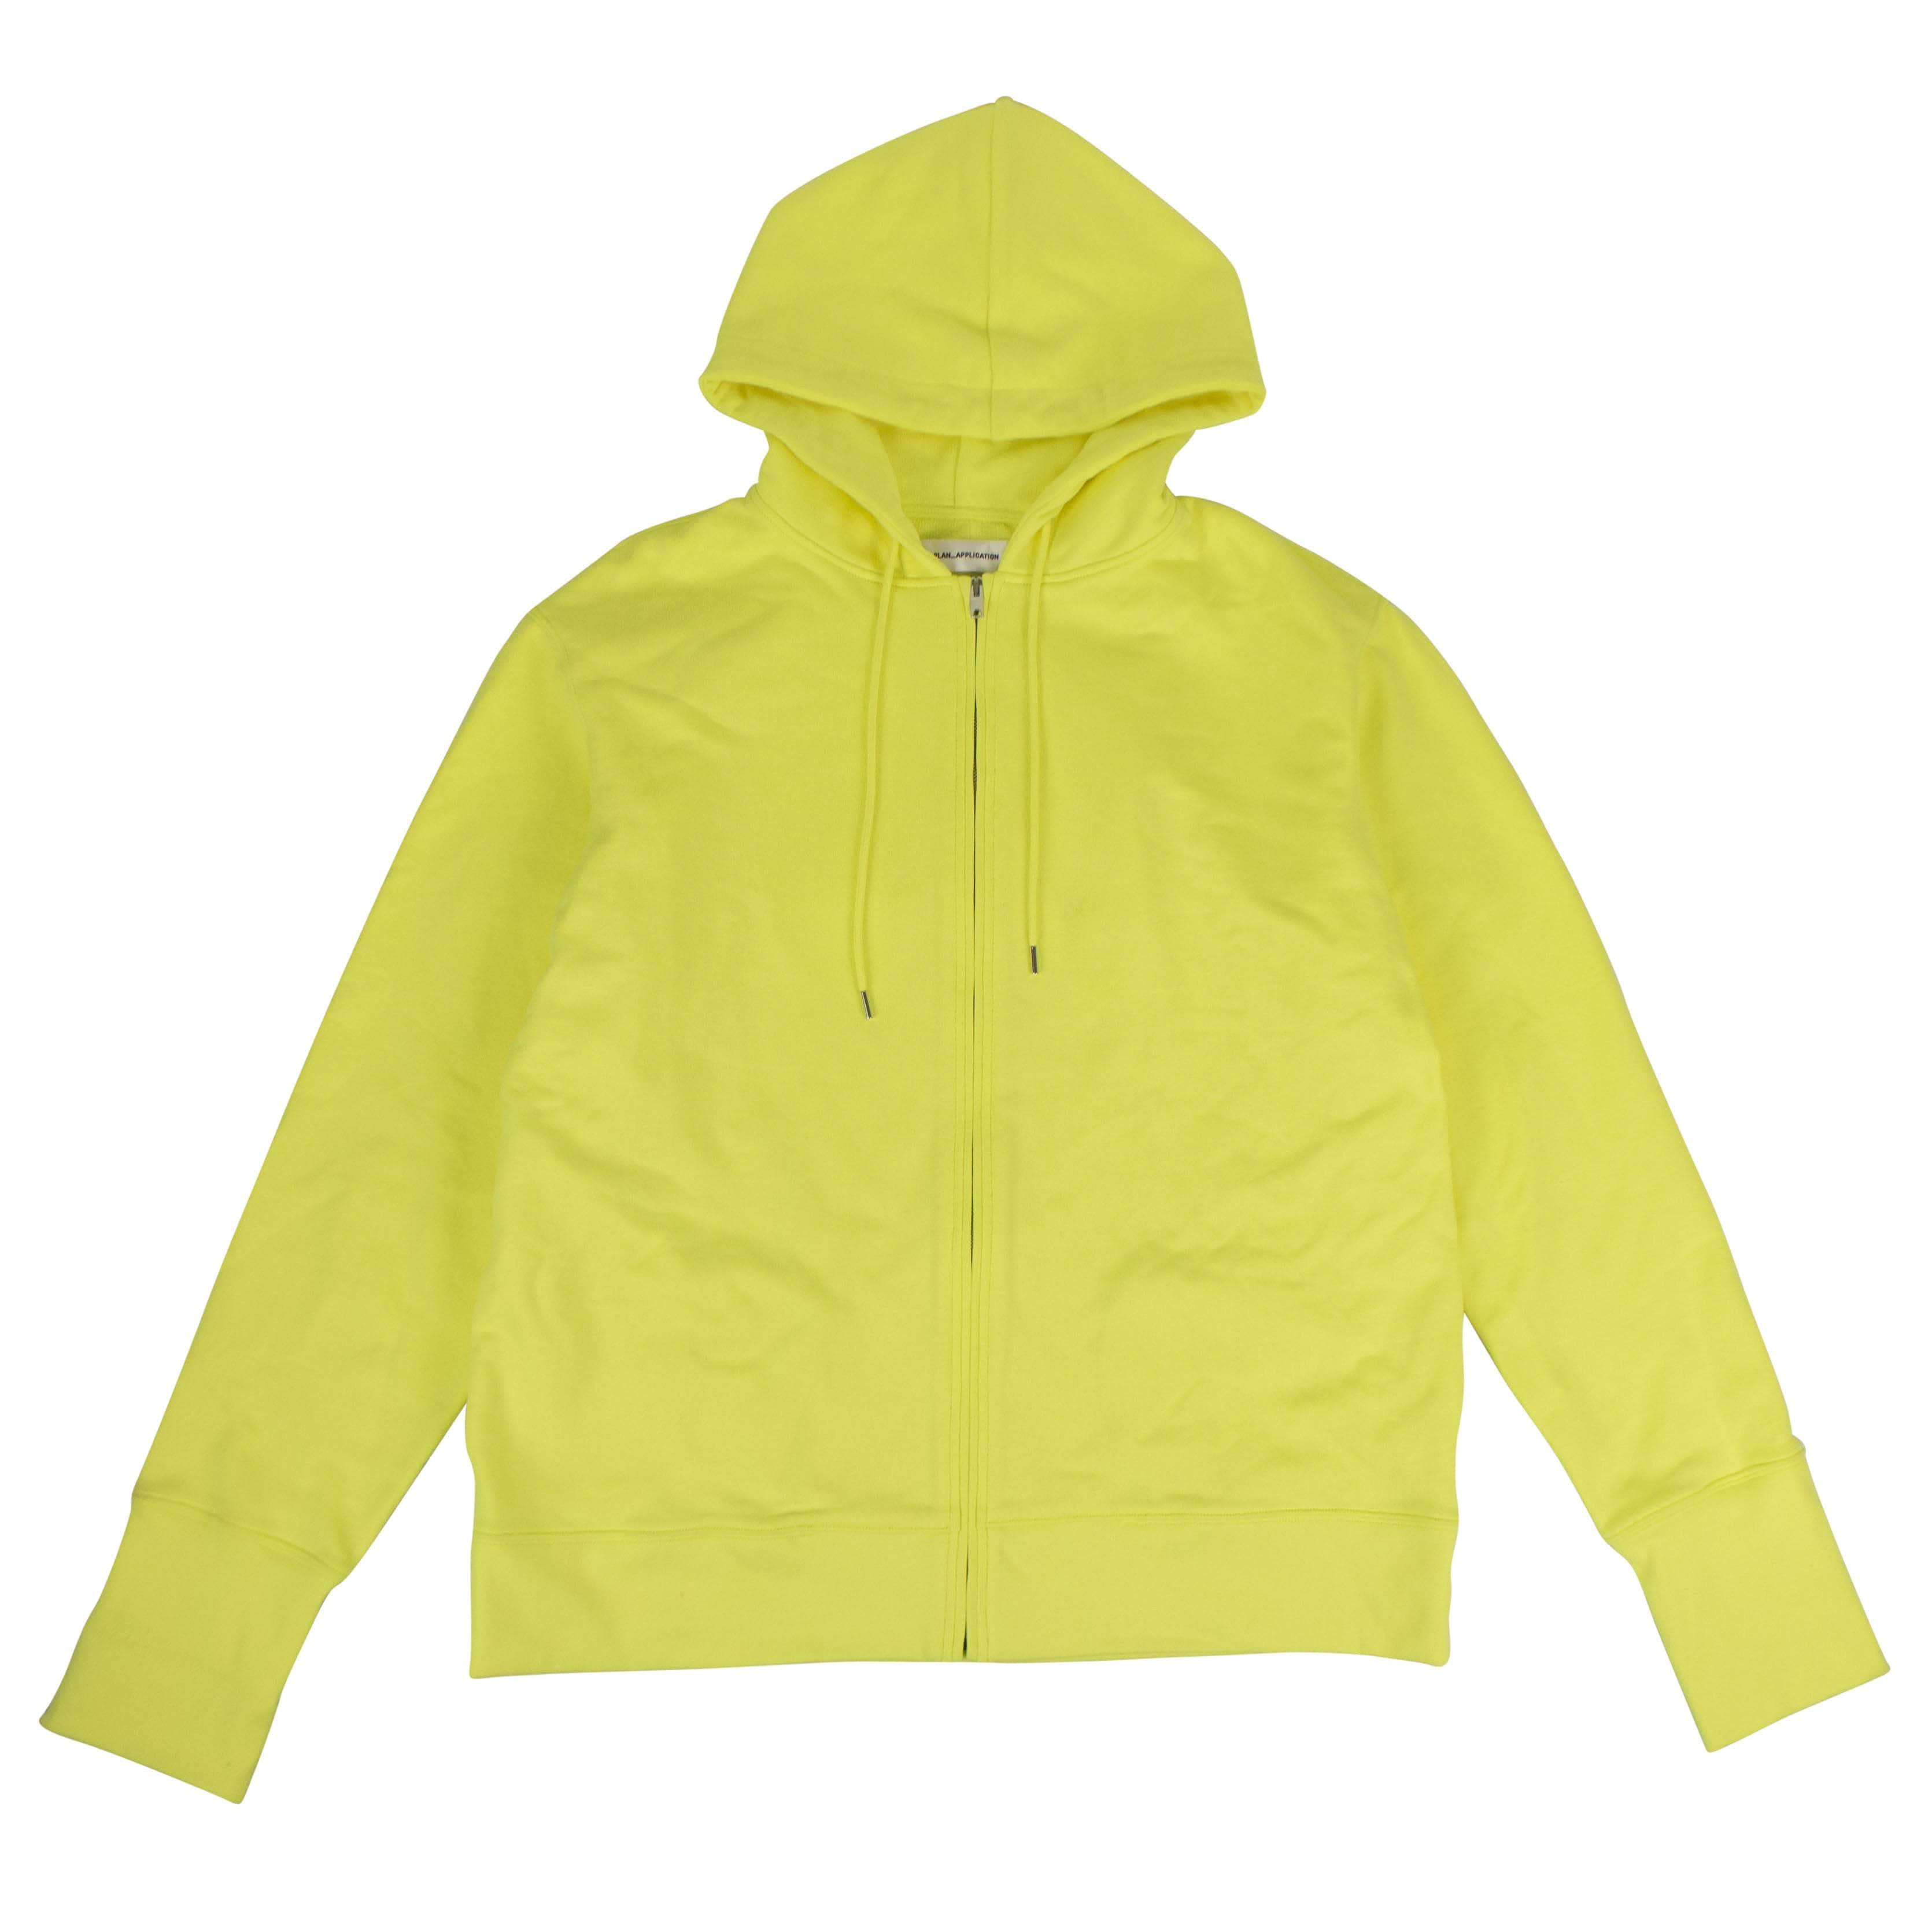 A_Plan_Application a_plan_application, couponcollection, gender-mens, main-clothing, mens-shoes, size-os, uncategorized, under-250 OS Neon Yellow Full Zip Sweatshirt JF6-AP-1004 JF6-AP-1004